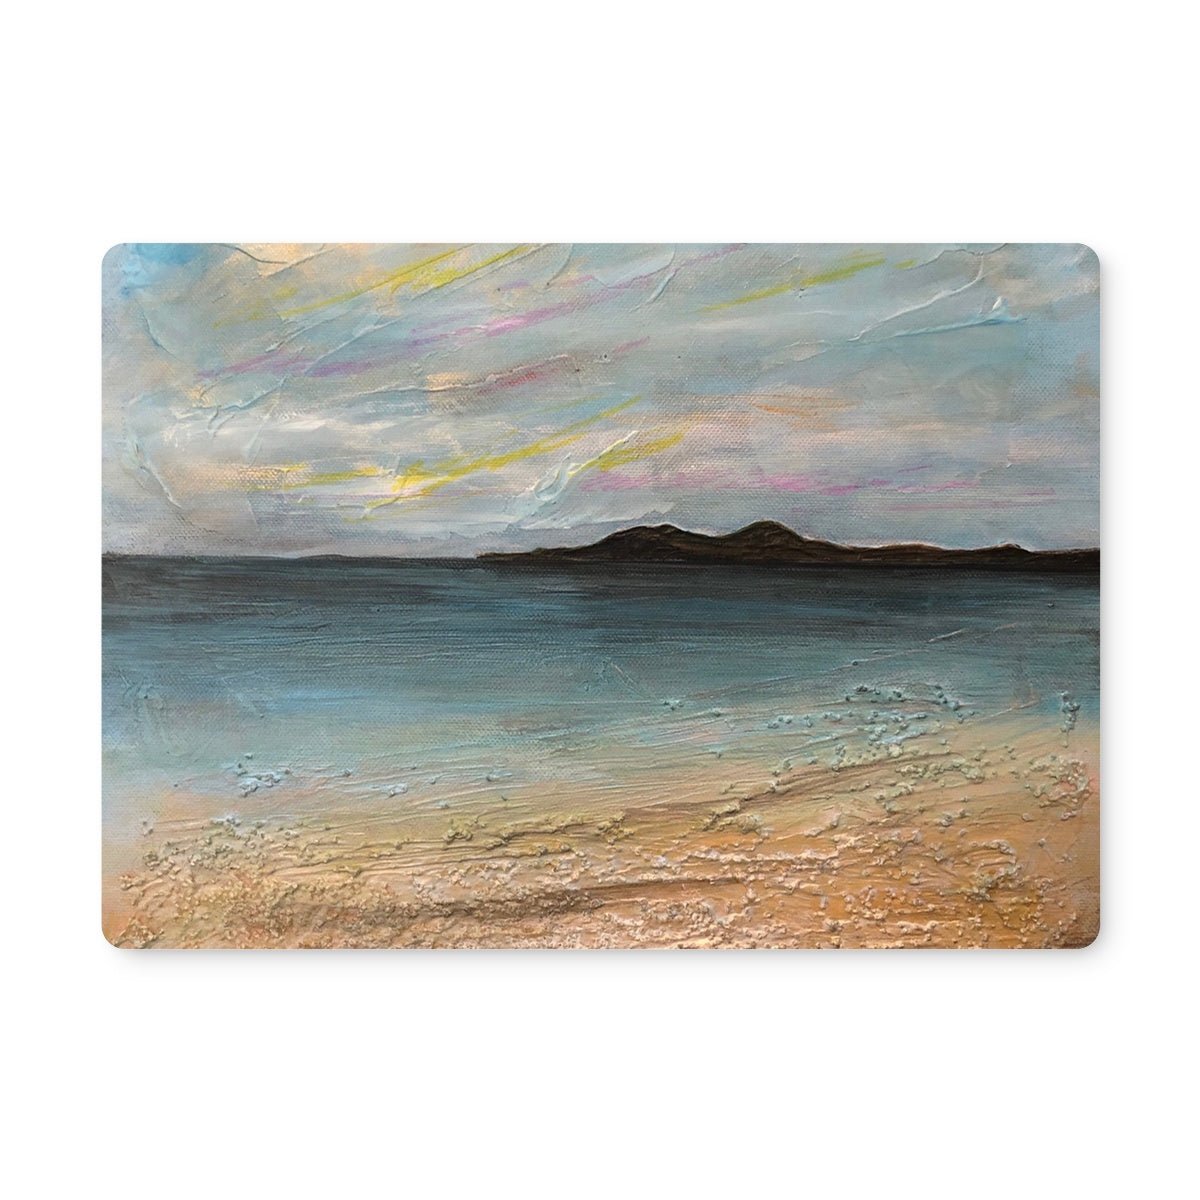 Garrynamonie Beach South Uist Art Gifts Placemat-Placemats-Hebridean Islands Art Gallery-2 Placemats-Paintings, Prints, Homeware, Art Gifts From Scotland By Scottish Artist Kevin Hunter